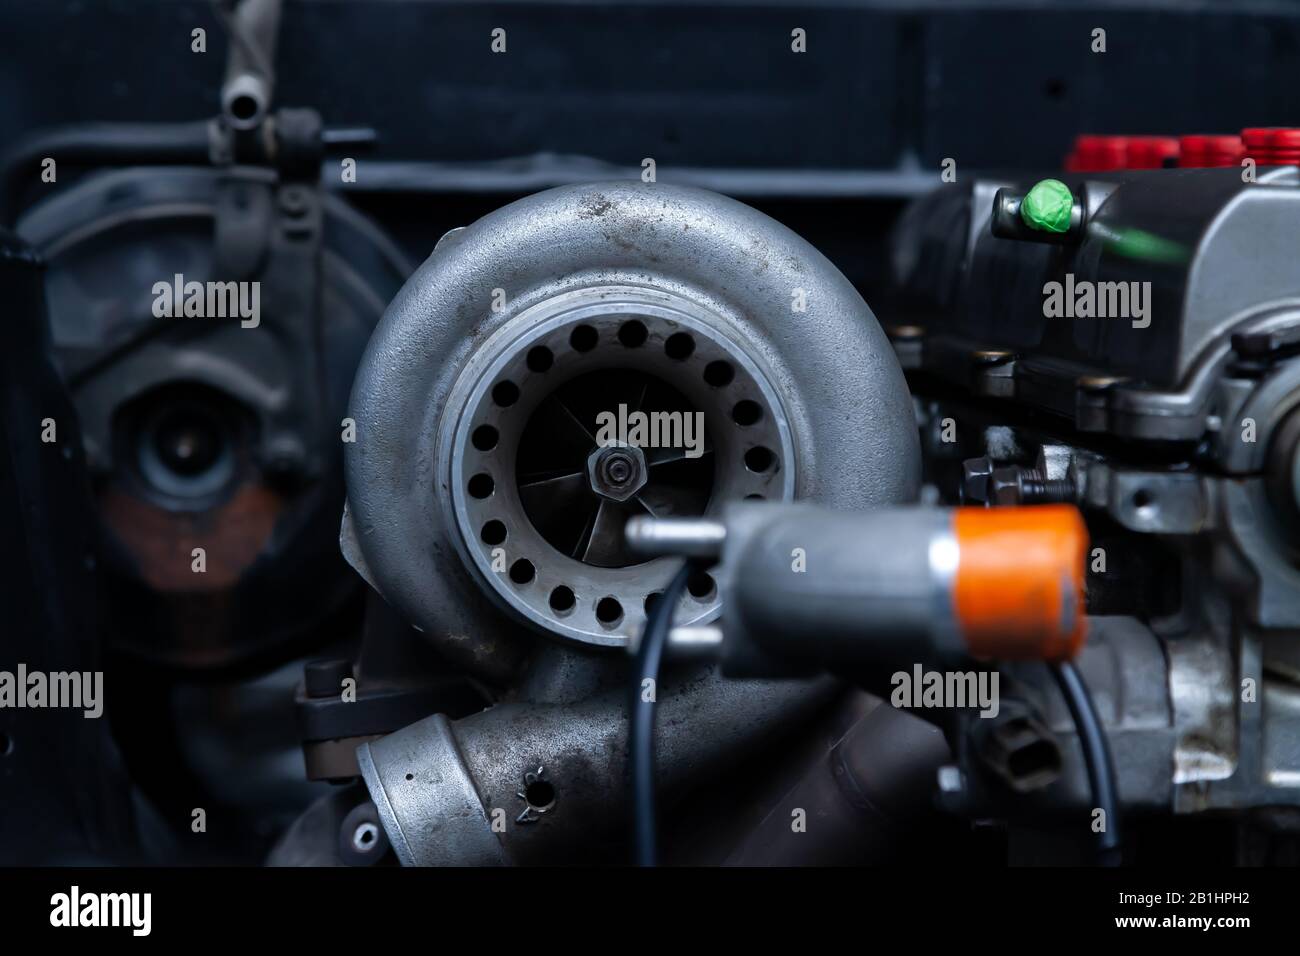 Turbo charger installed on car engine for power booster torque drive. Auto service industry for racing. Stock Photo